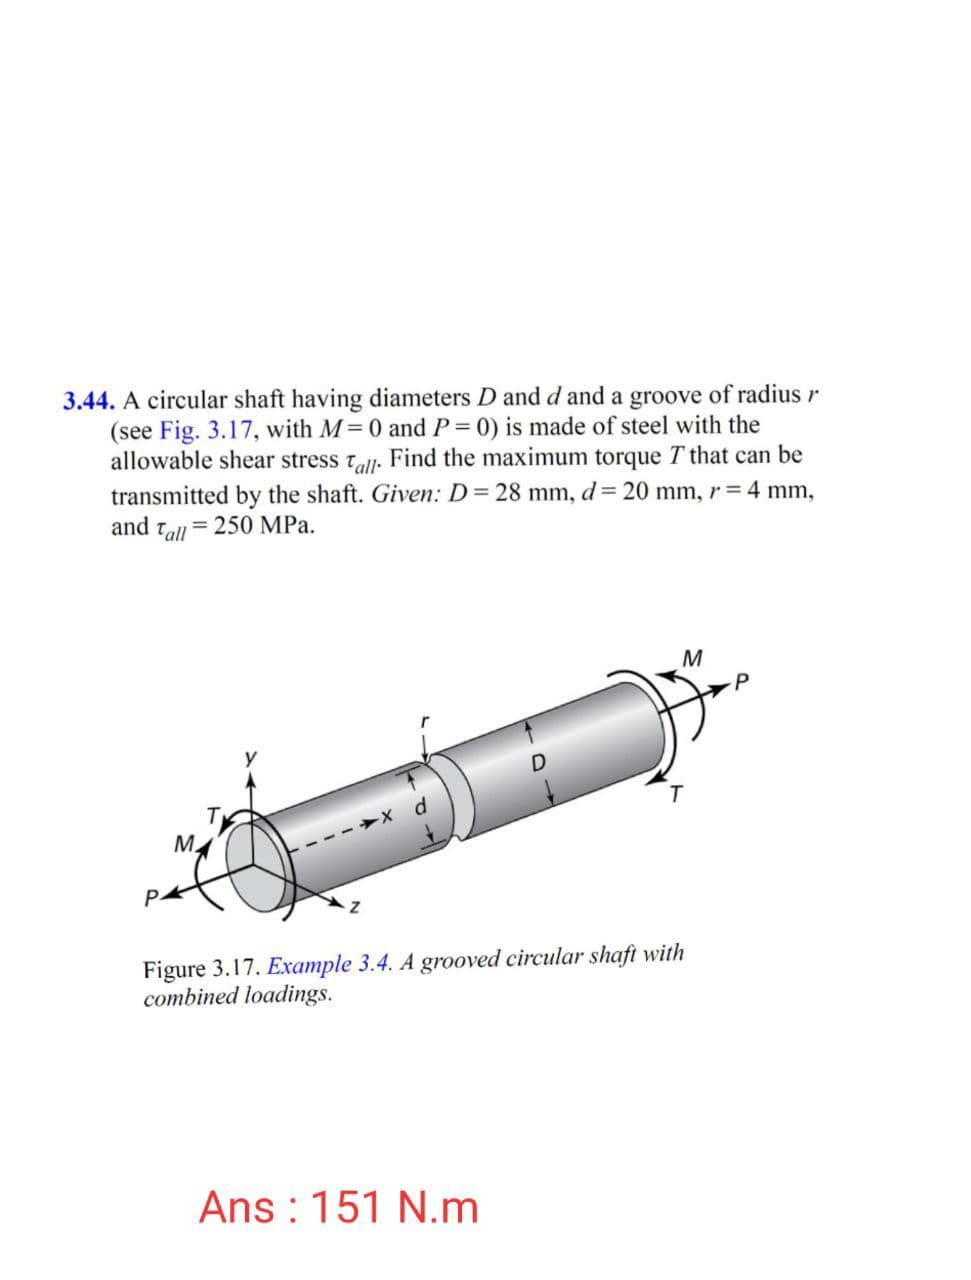 3.44. A circular shaft having diameters D and d and a groove of radius r
(see Fig. 3.17, with M=0 and P = 0) is made of steel with the
allowable shear stress tall. Find the maximum torque T that can be
transmitted by the shaft. Given: D= 28 mm, d3 20 mm, r = 4 mm,
and tall = 250 MPa.
M
M.
Figure 3.17. Example 3.4. A grooved circular shaft with
combined loadings.
Ans : 151 N.m
